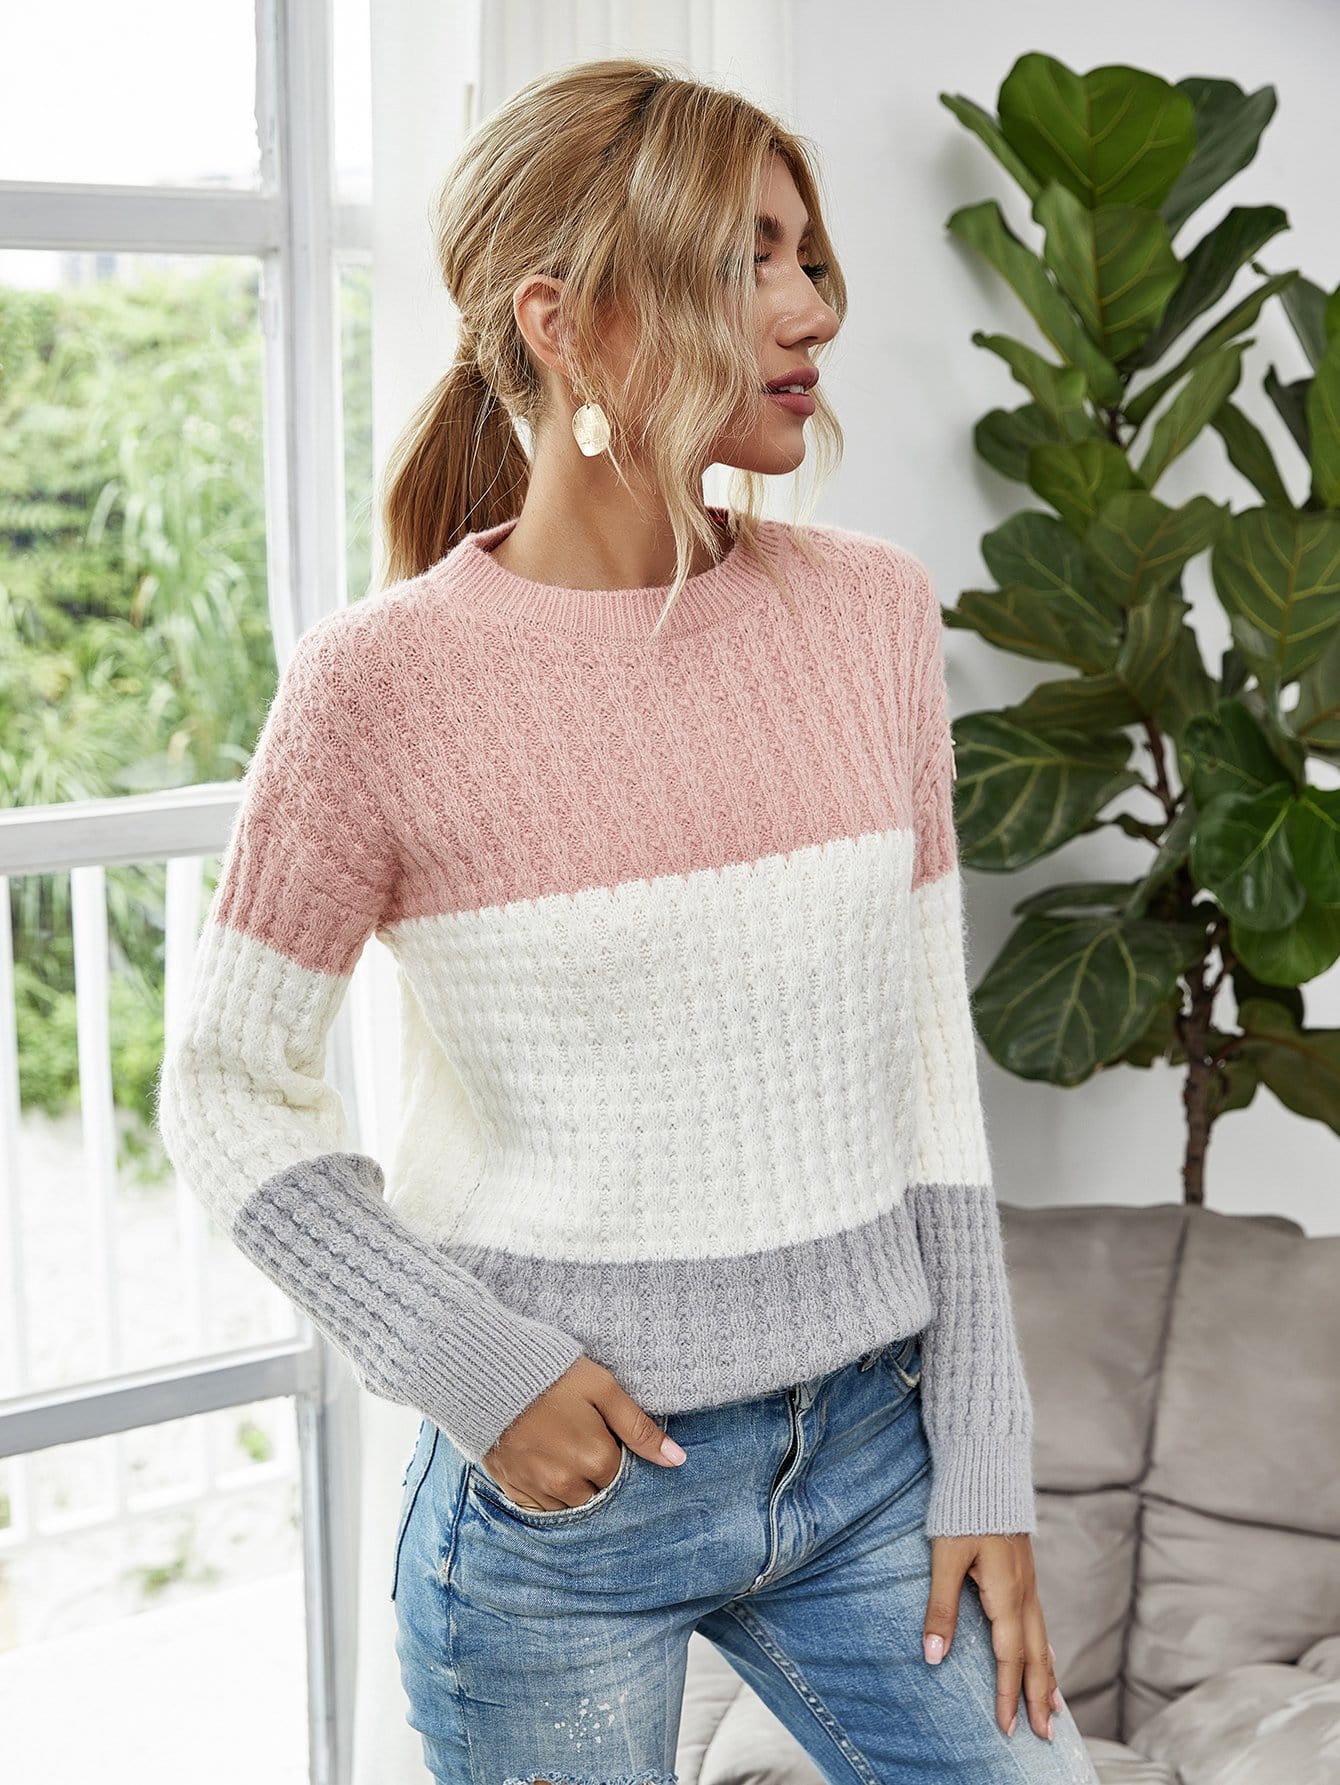 Textured Knit Color Block Striped Sweater